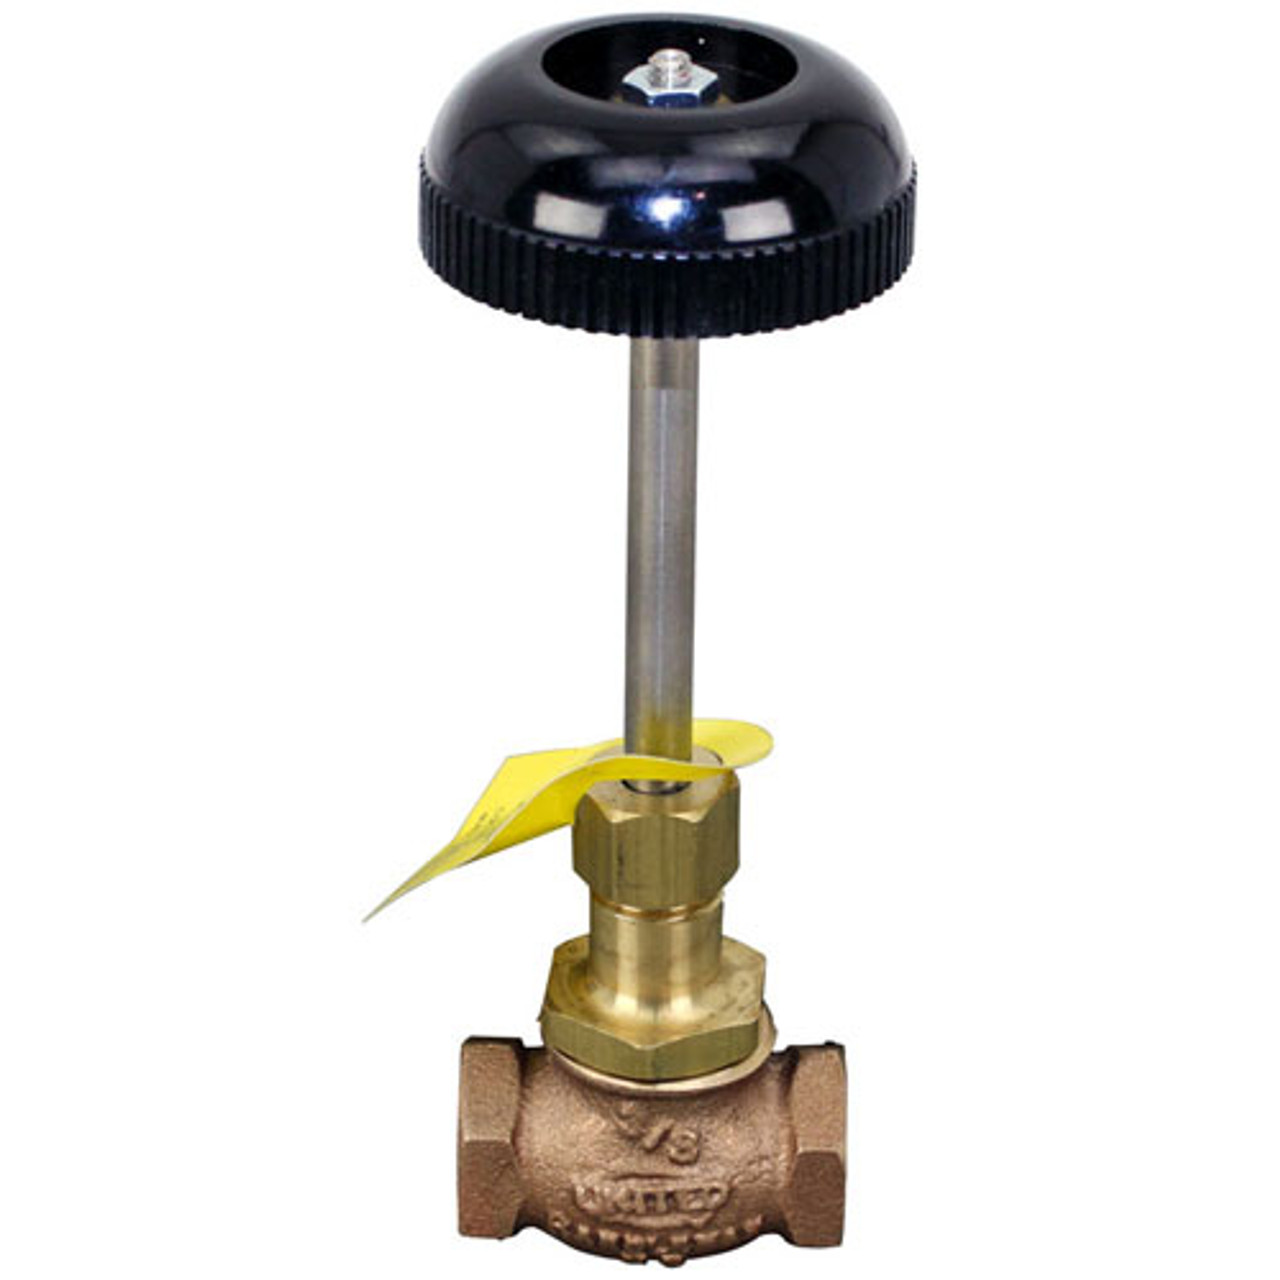 Steam Valve - Replacement Part For Cleveland 22196